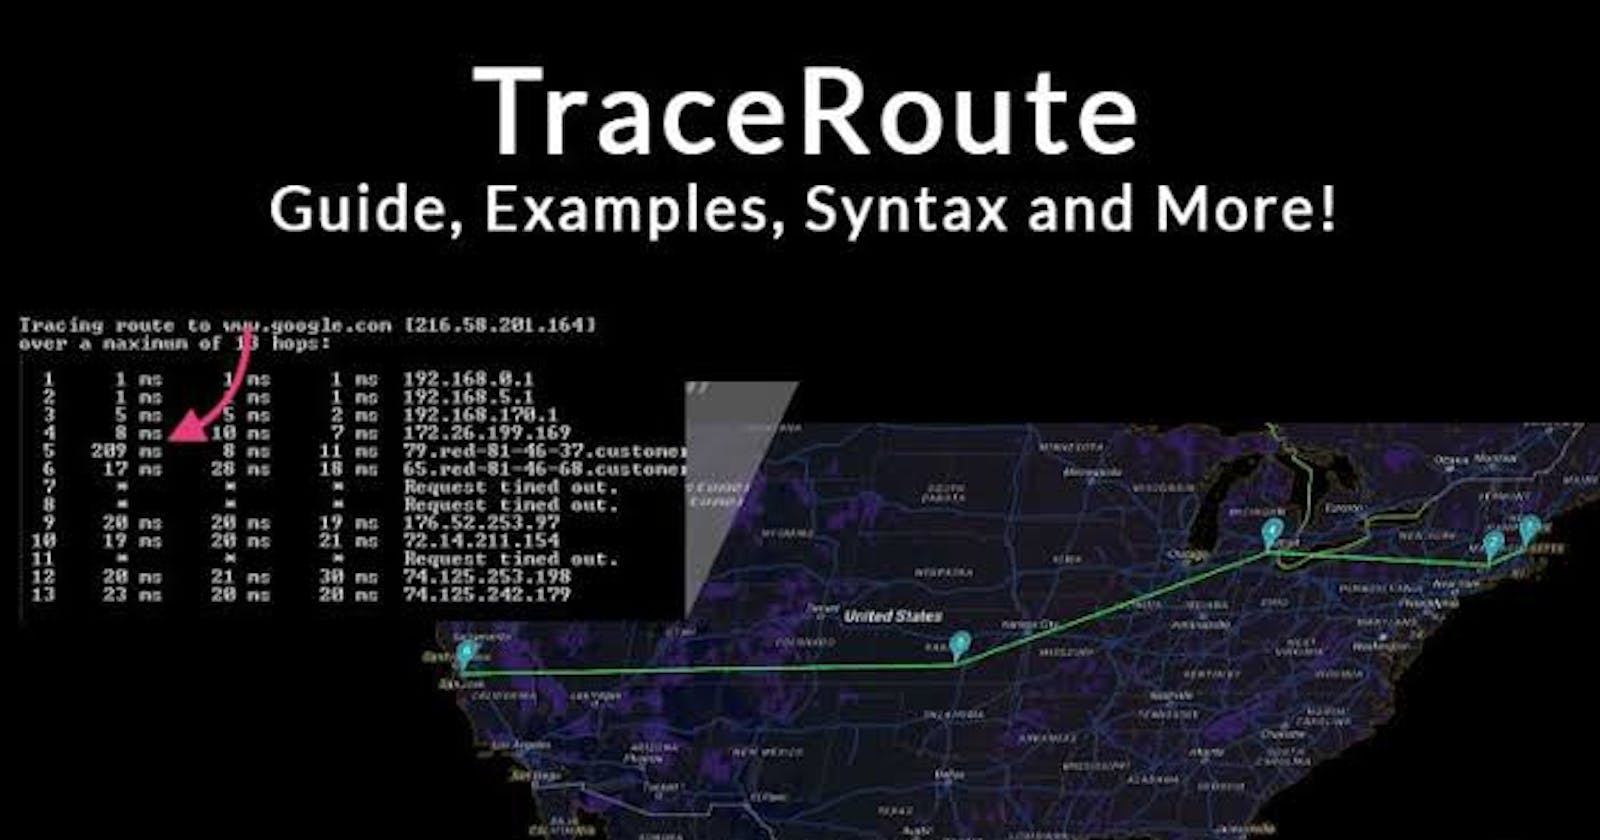 What Is Traceroute and How Does It Work?